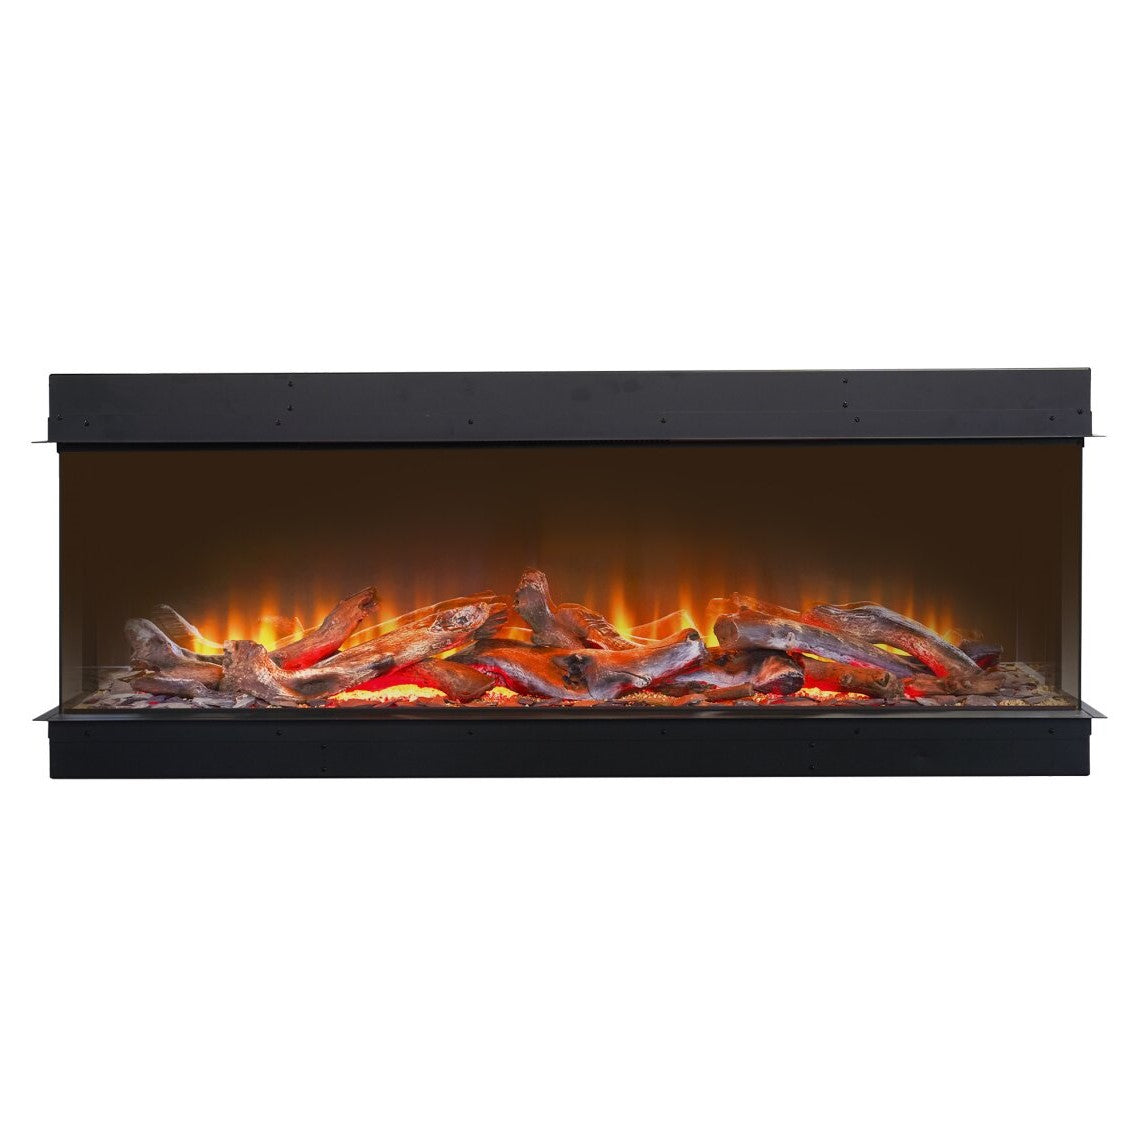 Acantha Ignis 1500 Fully Inset Media Wall Electric Fire🔥